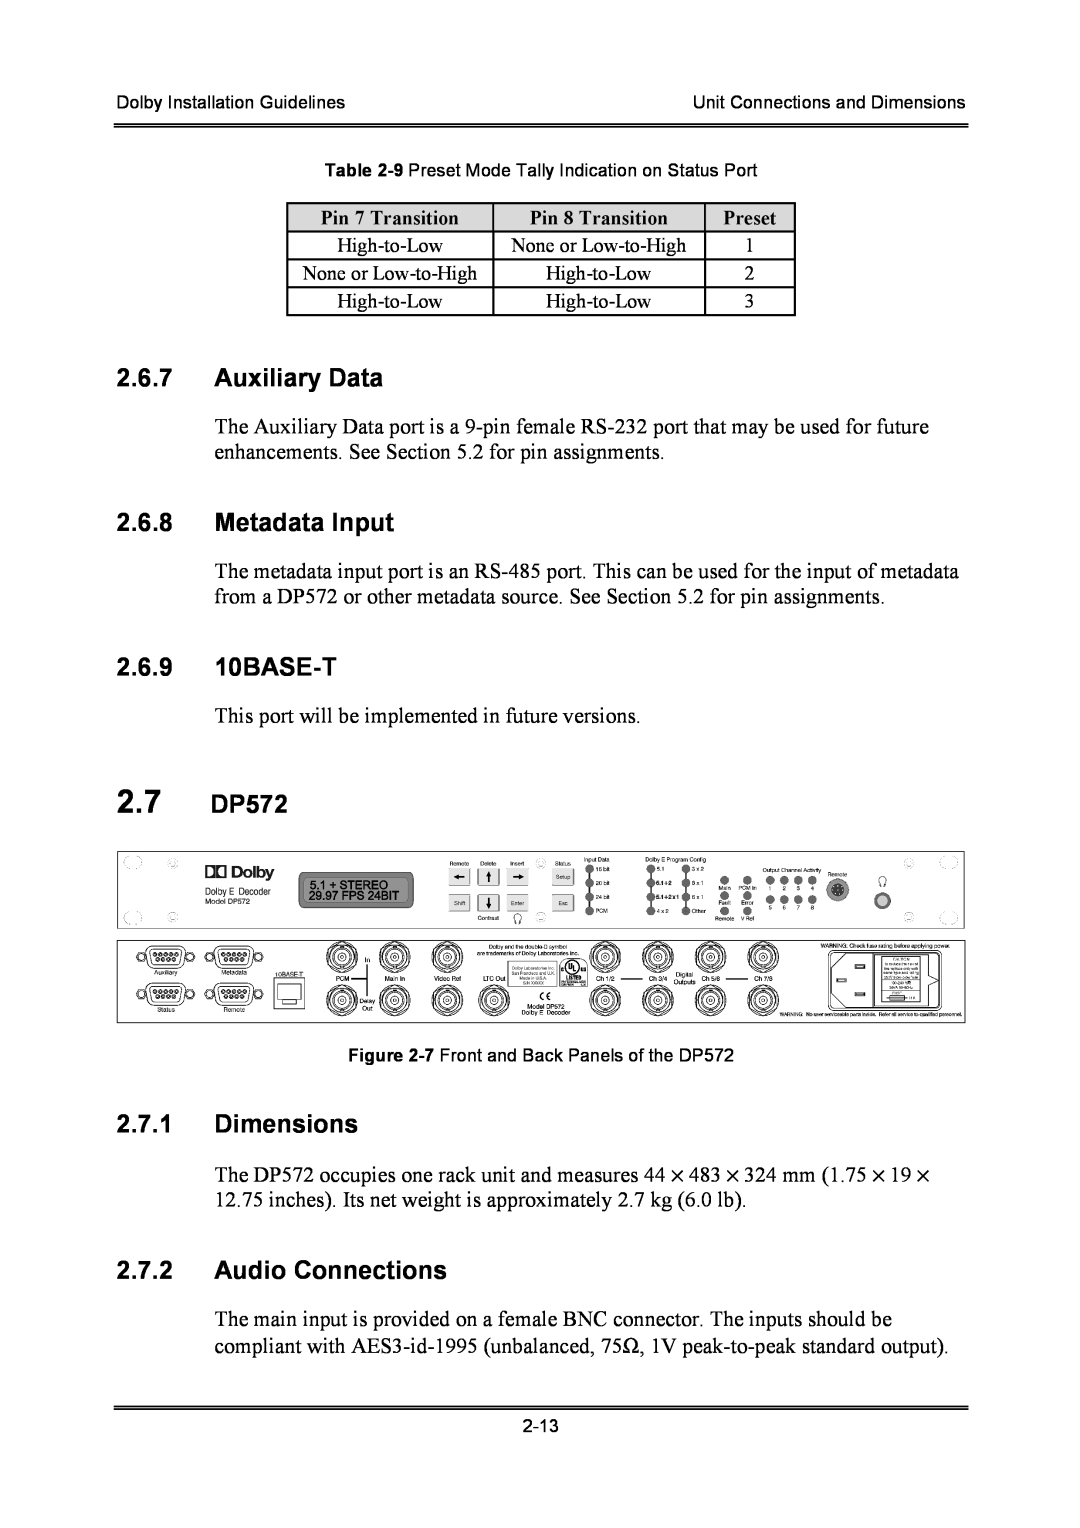 Dolby Laboratories S01/13621 manual Auxiliary Data, Metadata Input, 2.6.9 10BASE-T, 2.7 DP572, 2.7.1Dimensions 